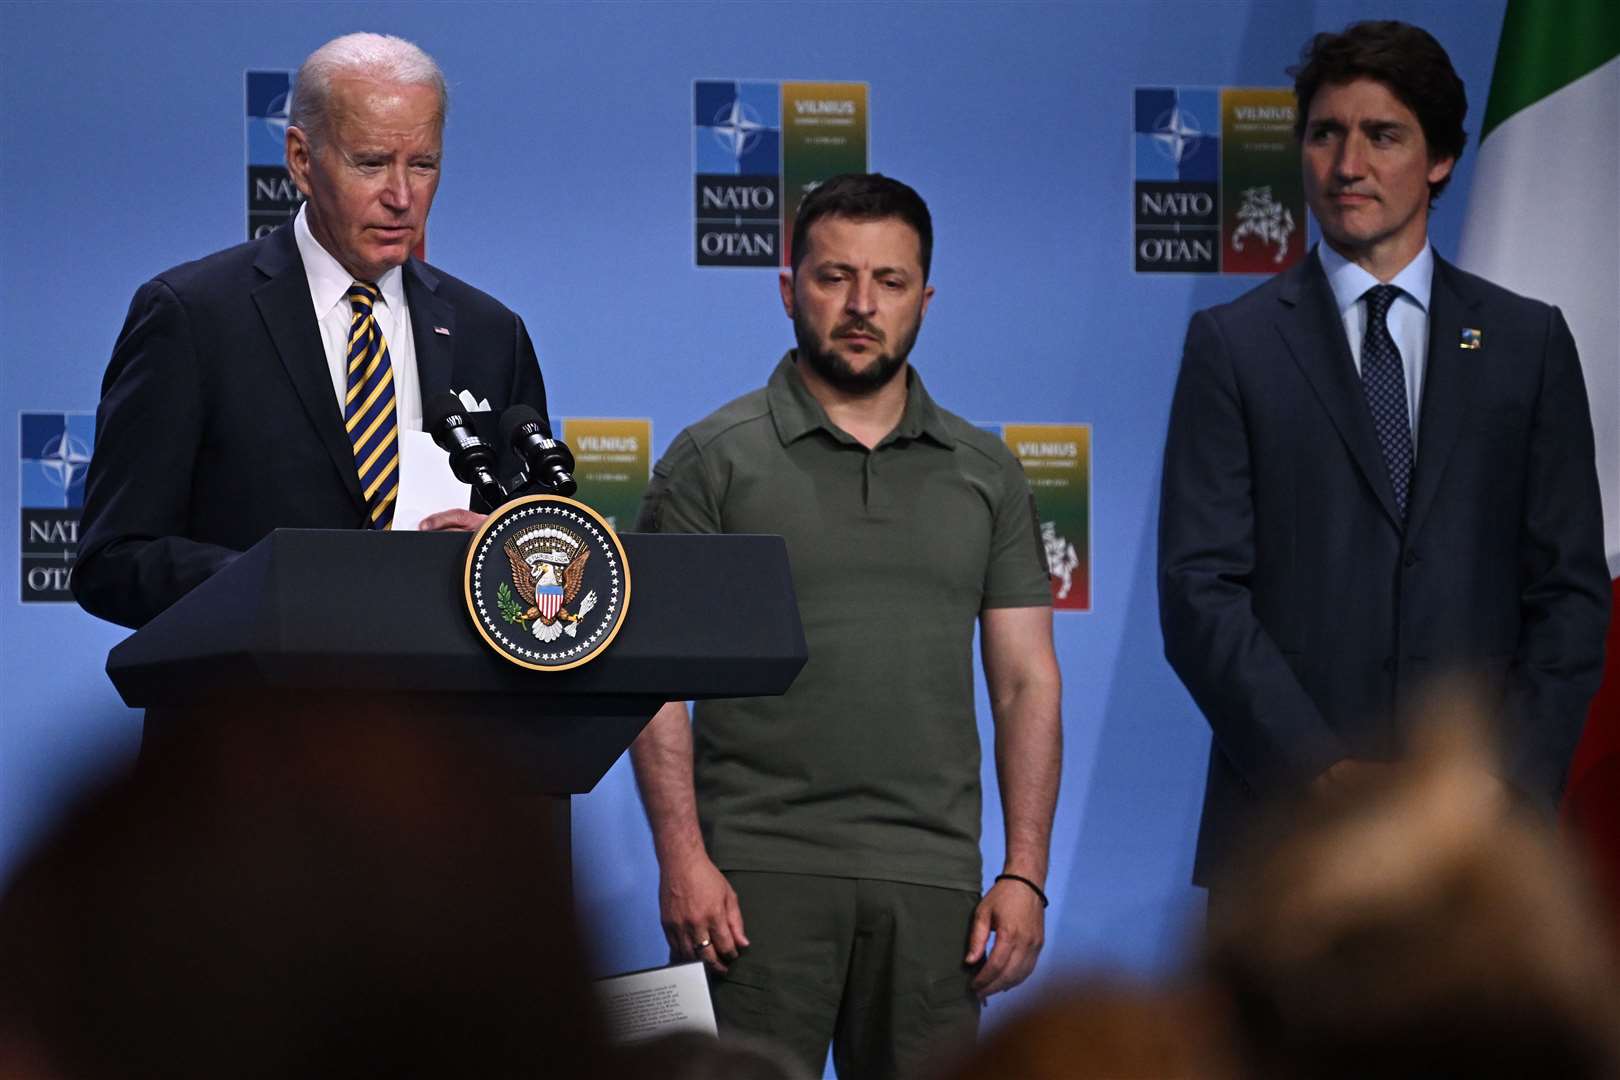 US President Joe Biden speaks at an event with G7 leaders next to Ukrainian President Volodymyr Zelensky and Canada’s prime minister Justin Trudeau (Paul Ellis/PA)